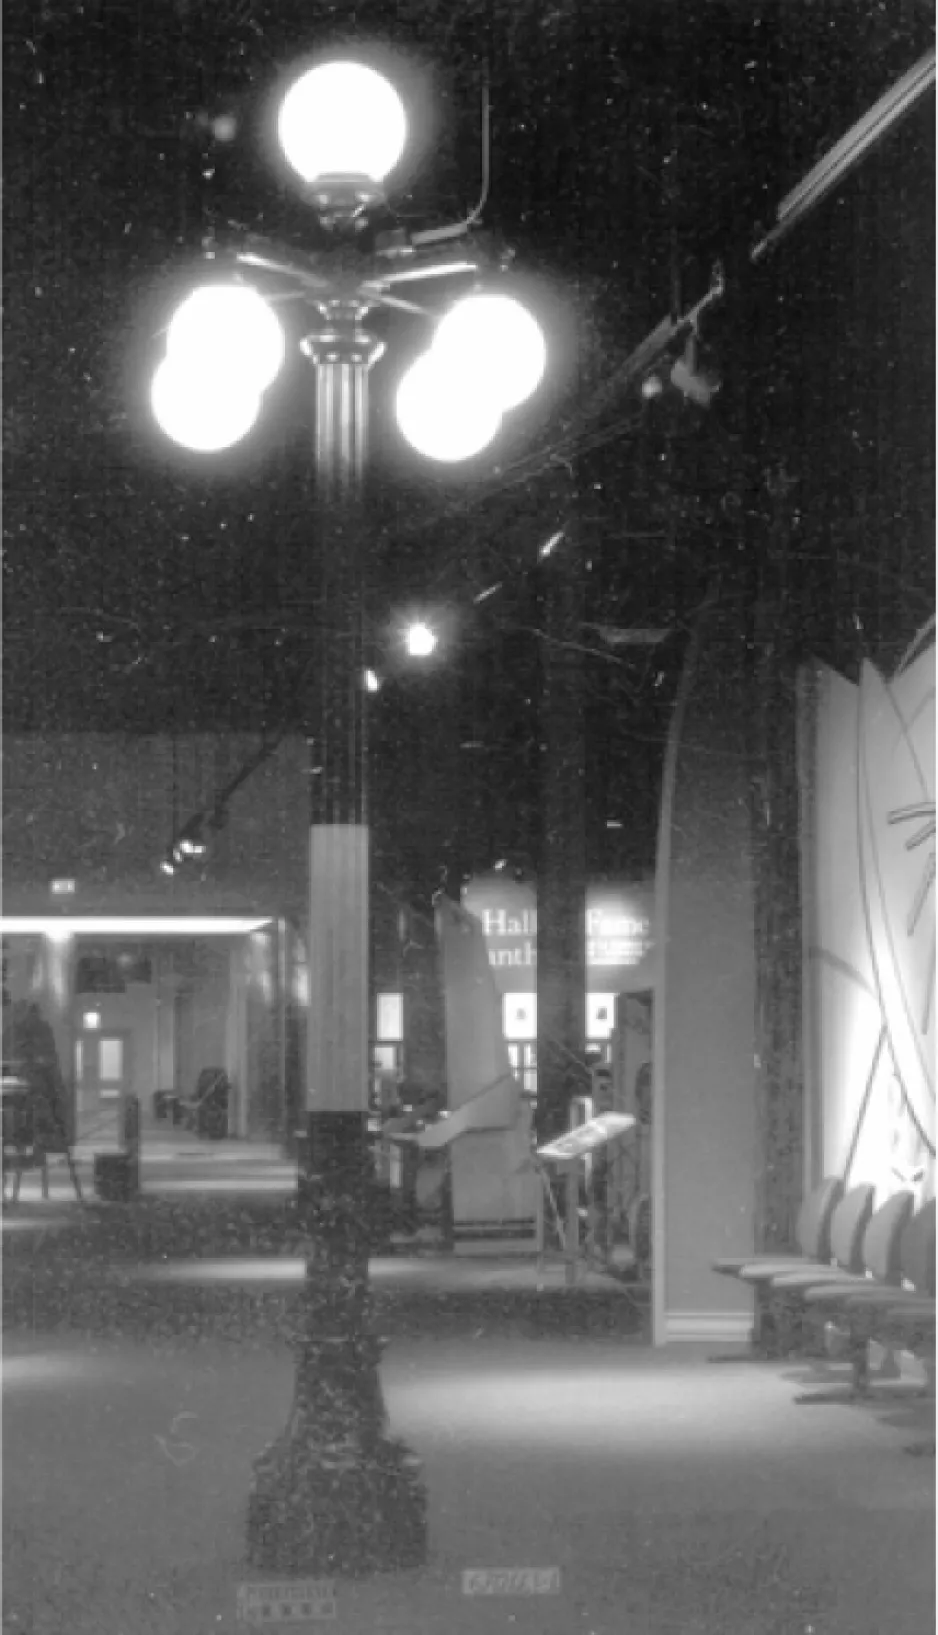 Black and white image of an old streetlamp topped with five brightly glowing globes. The lamp post is displayed indoors in a museum setting.